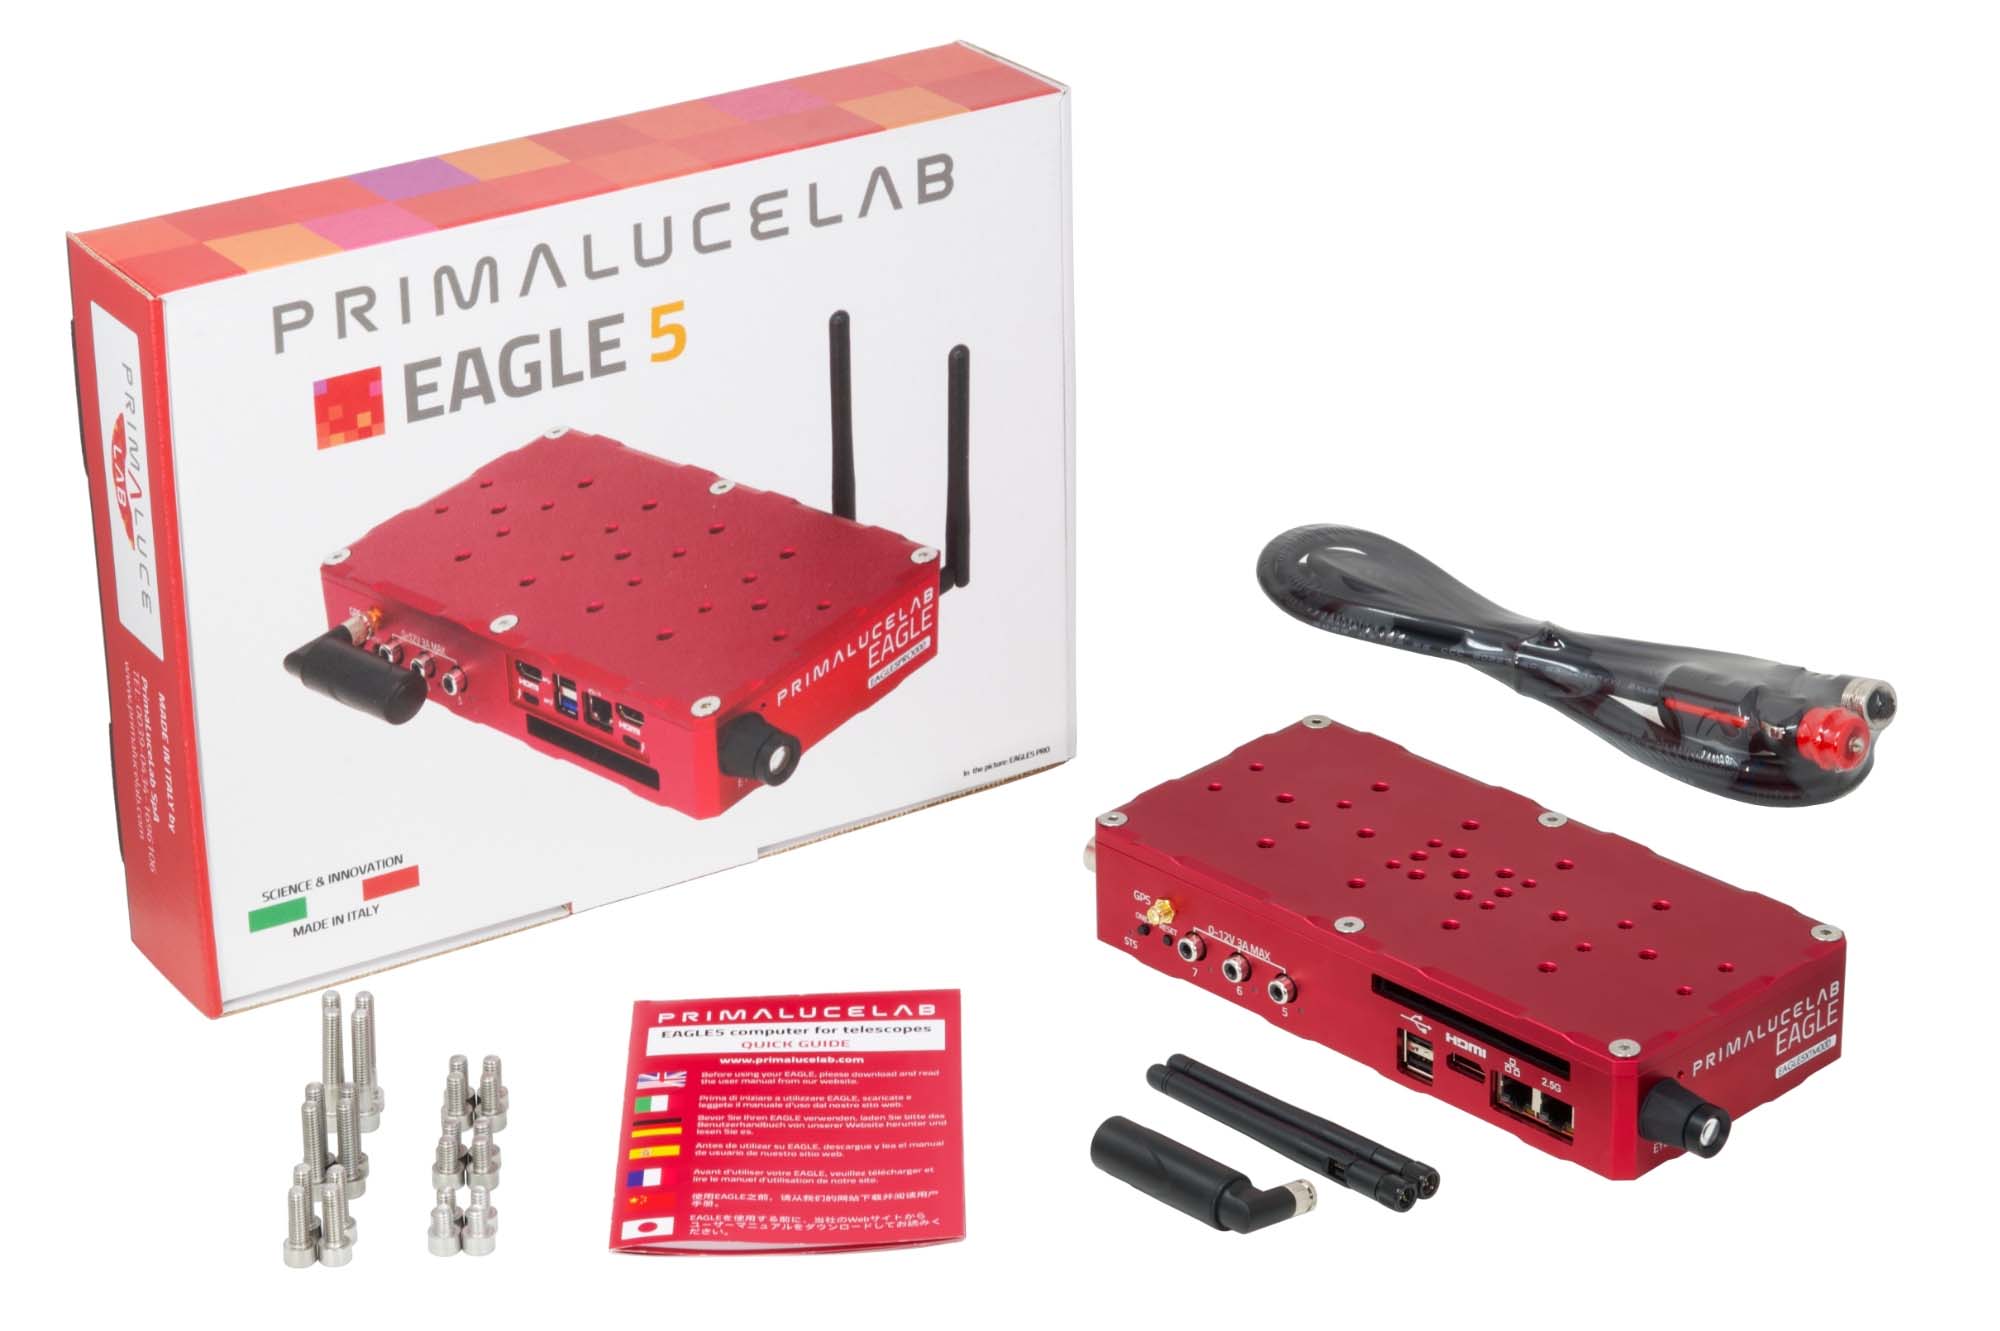 Primaluce Lab EAGLE5 XTM Scope of Delivery